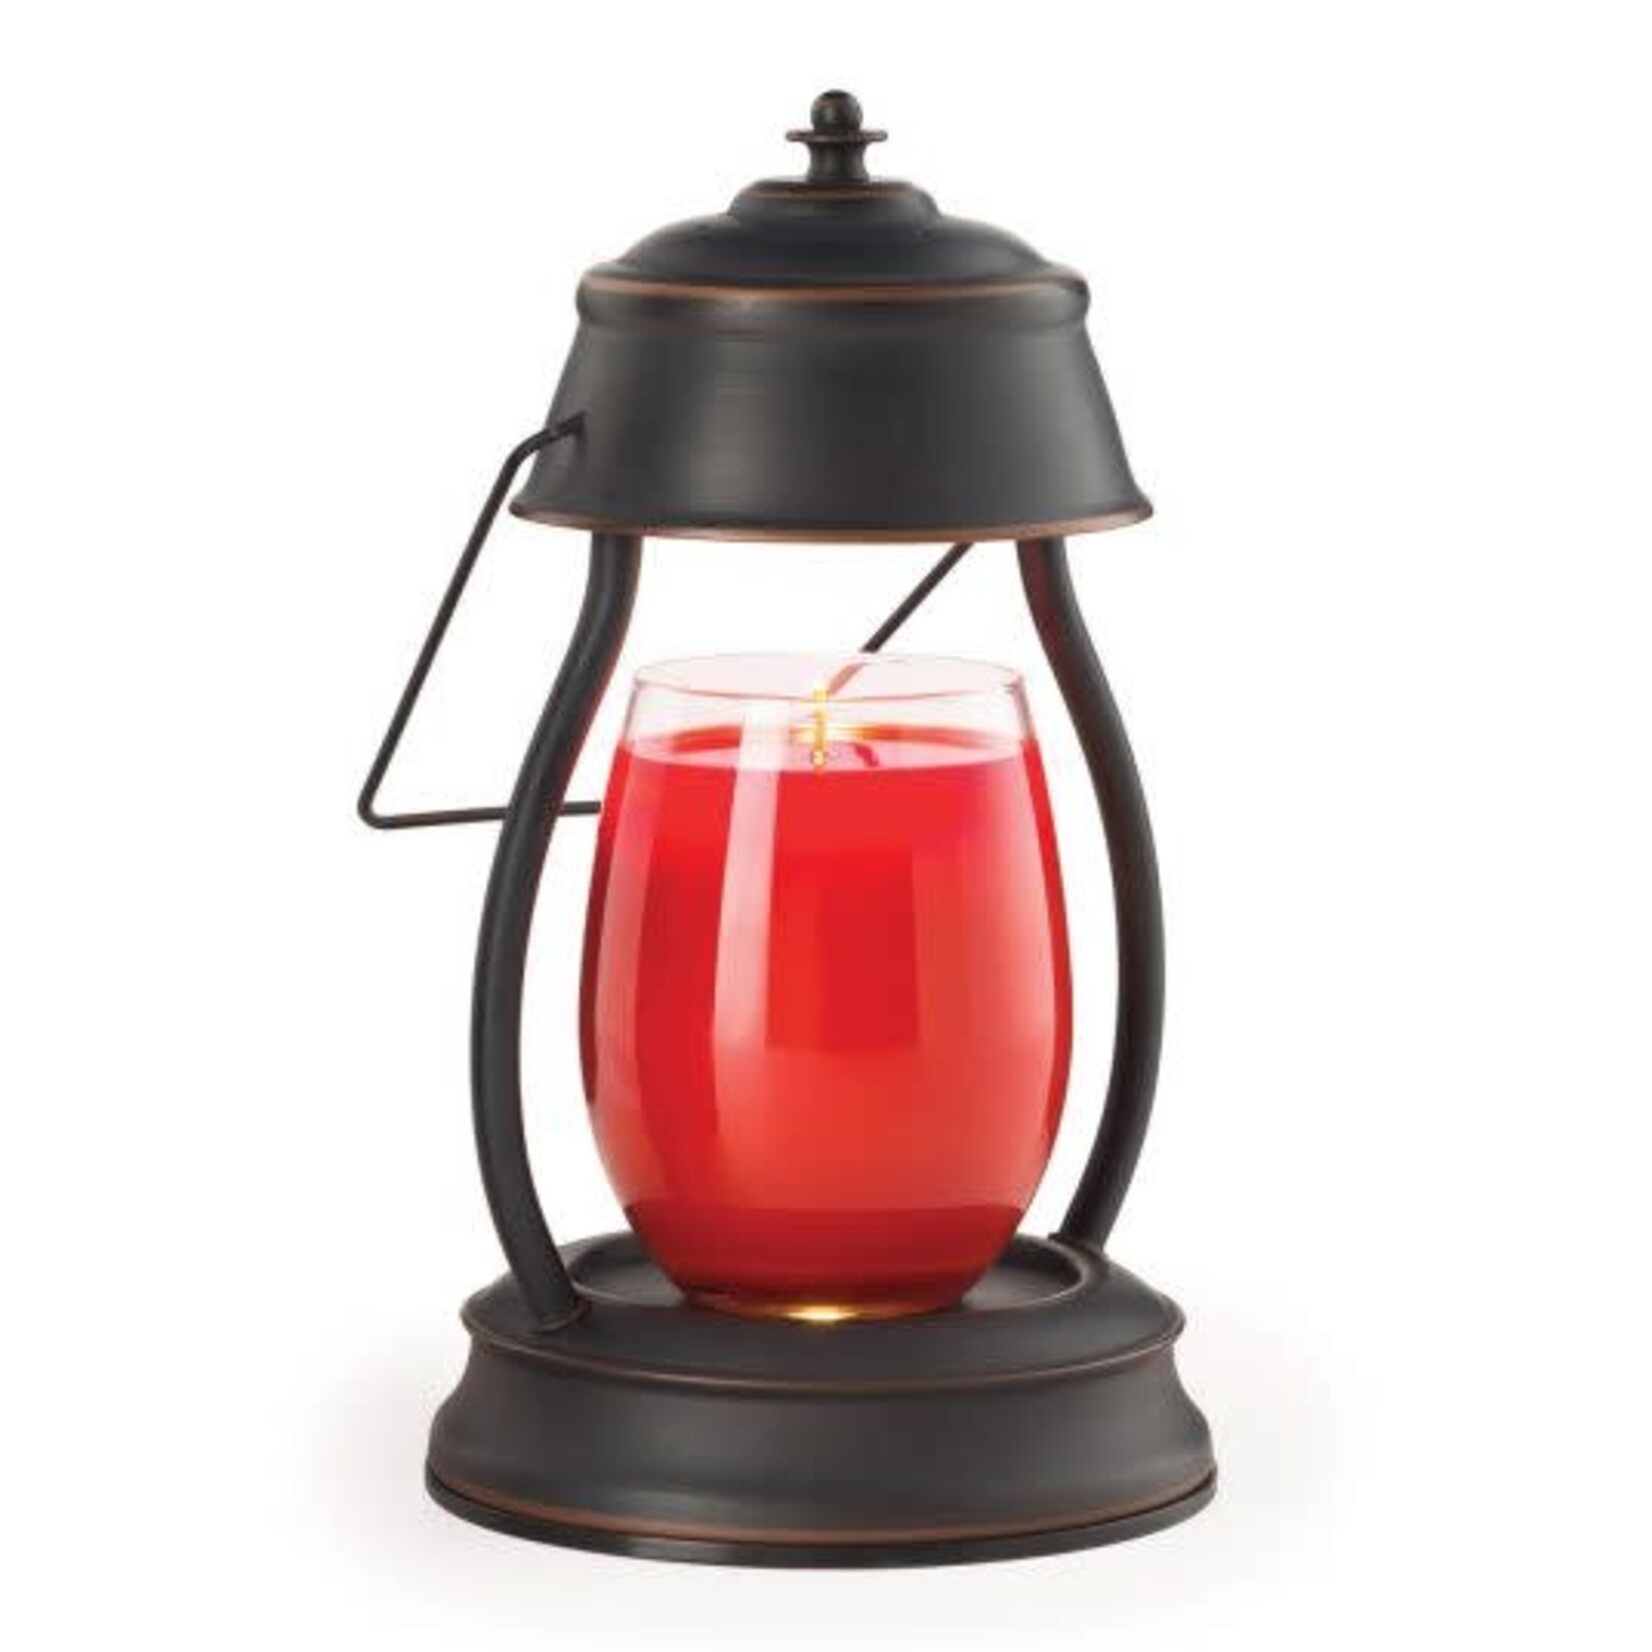 Candle Warmers Oil Rubbed Bronze Hurricane Lamp